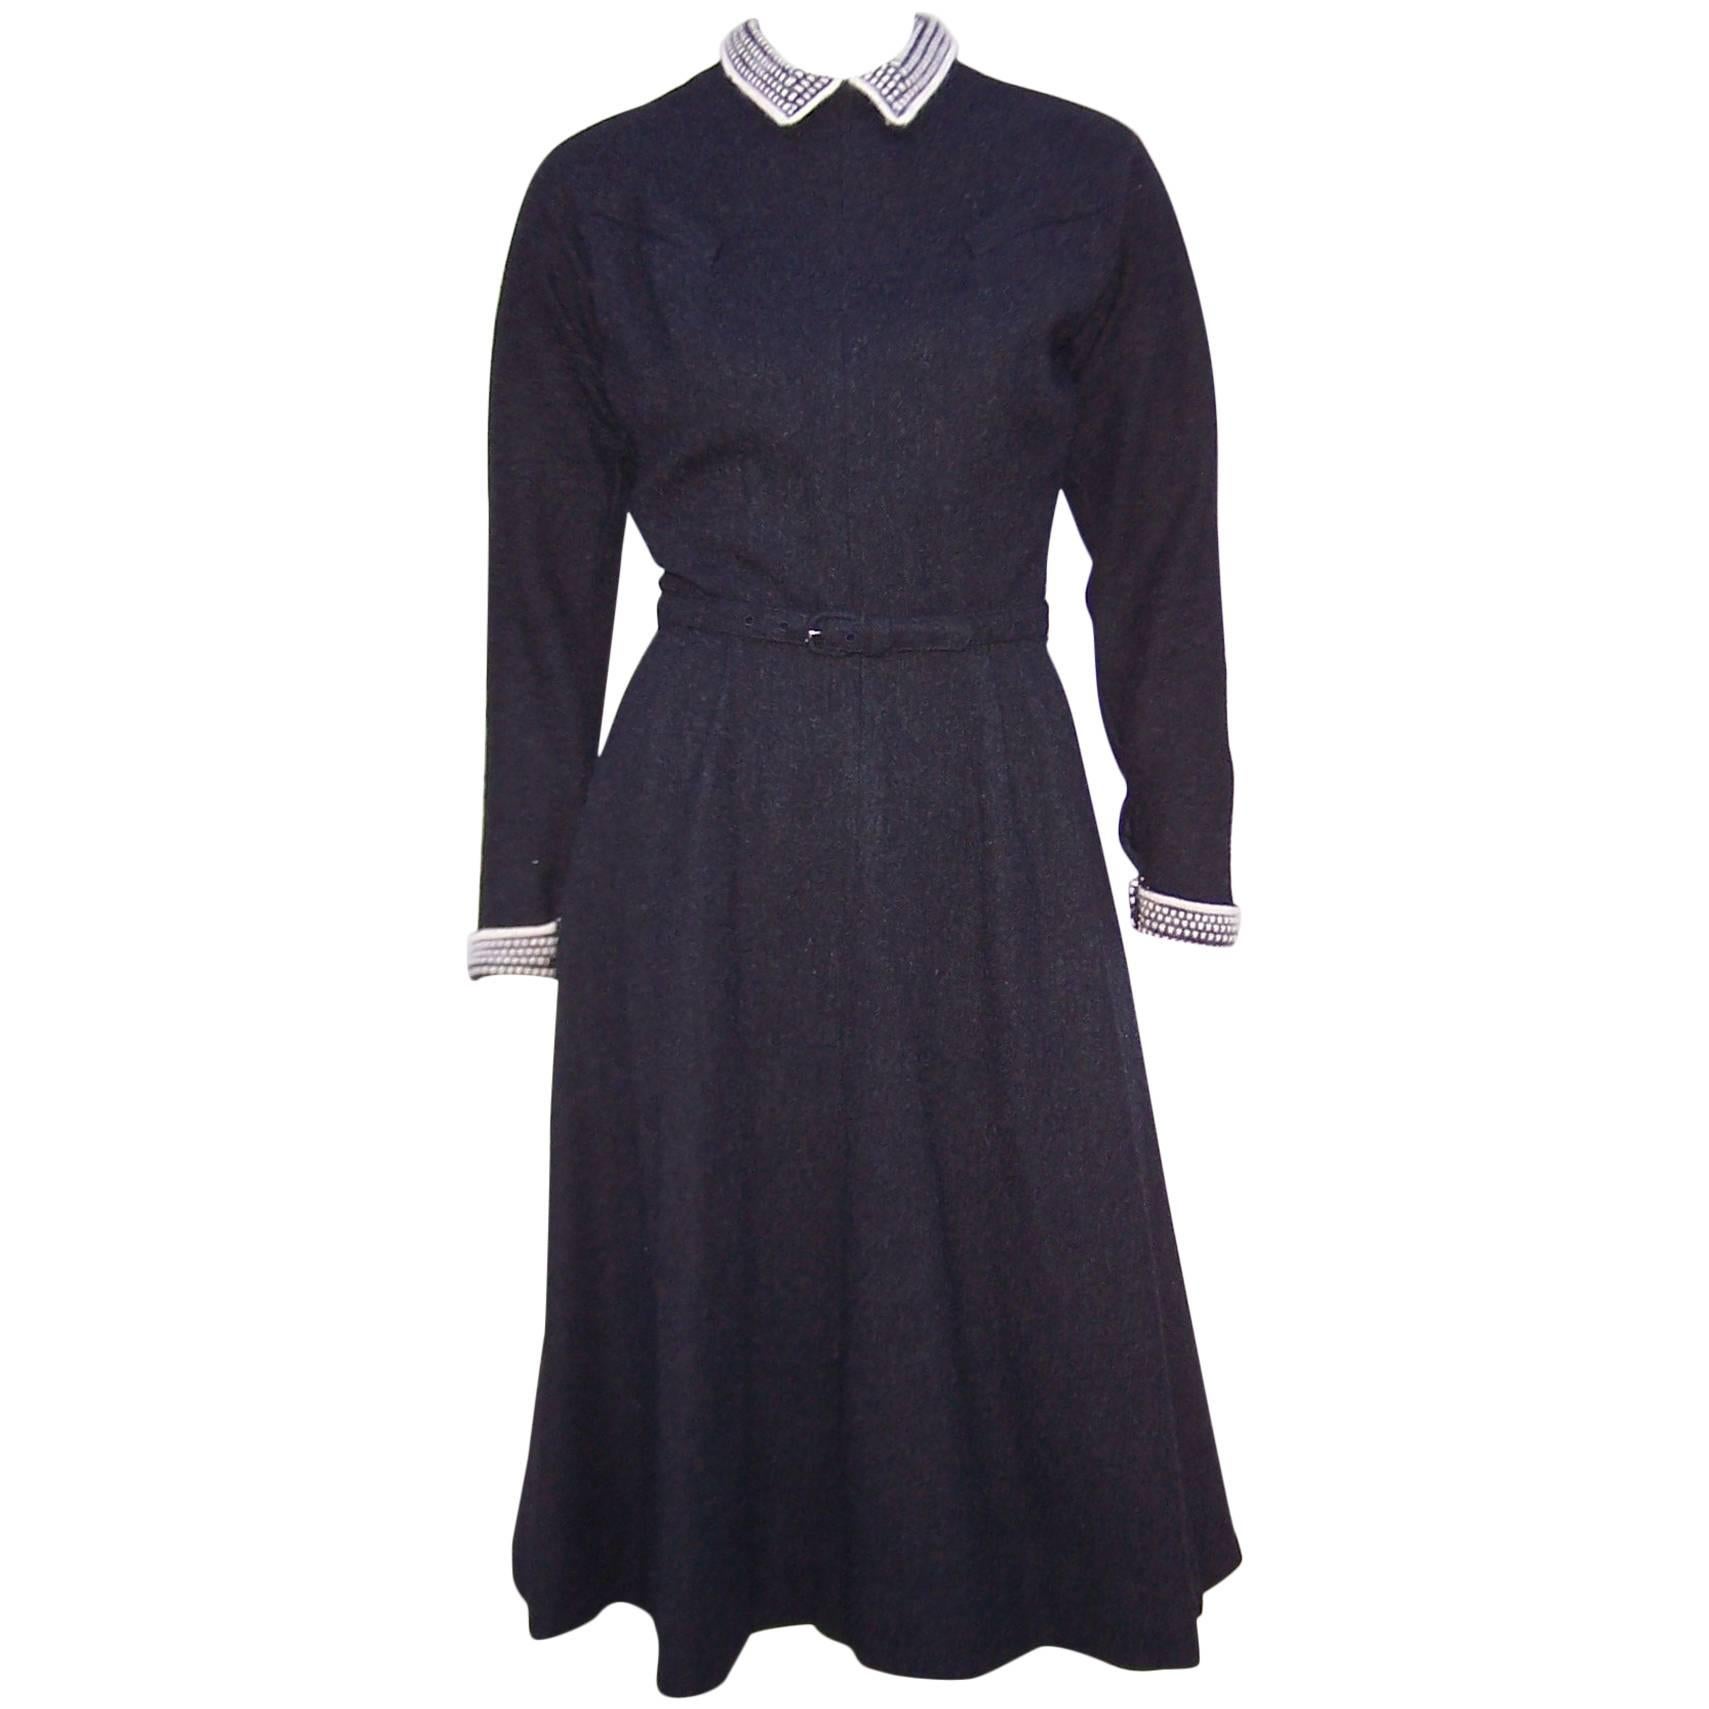 School Girl Style 1950's Charcoal Gray Wool Dress With Angora Details